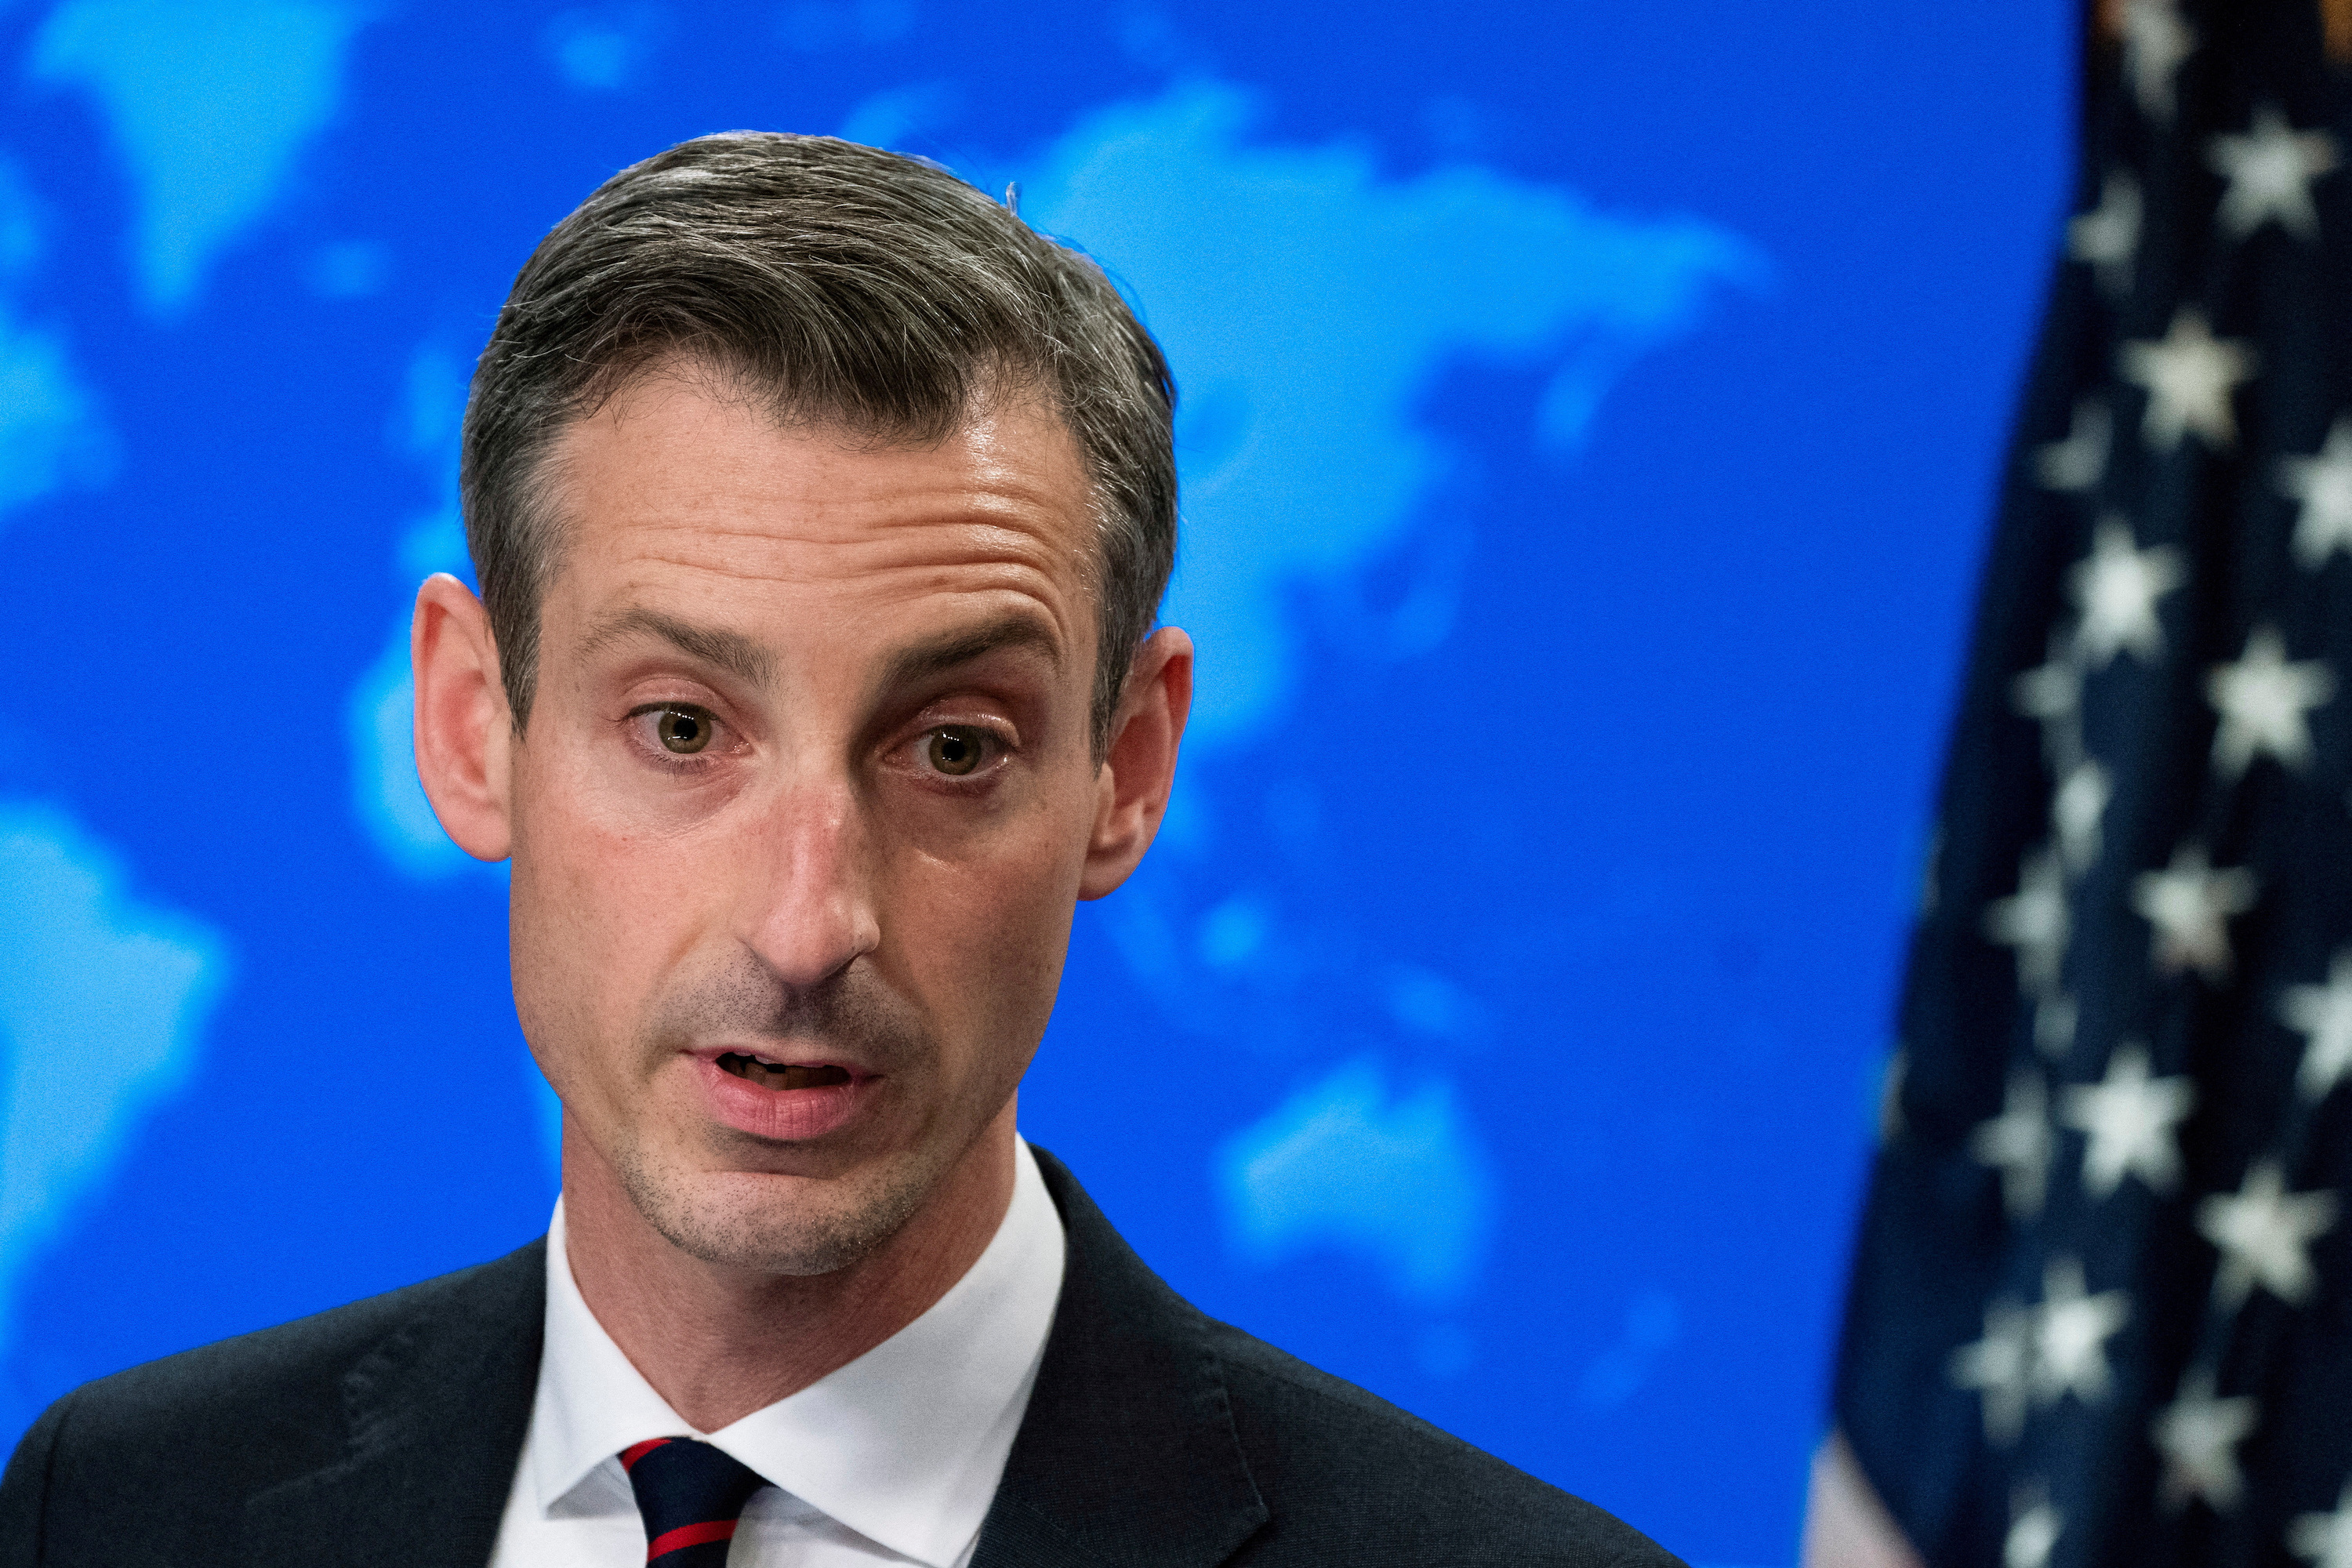 U.S. State Department spokesperson Ned Price during a news conference in Washington, DC on March 10.